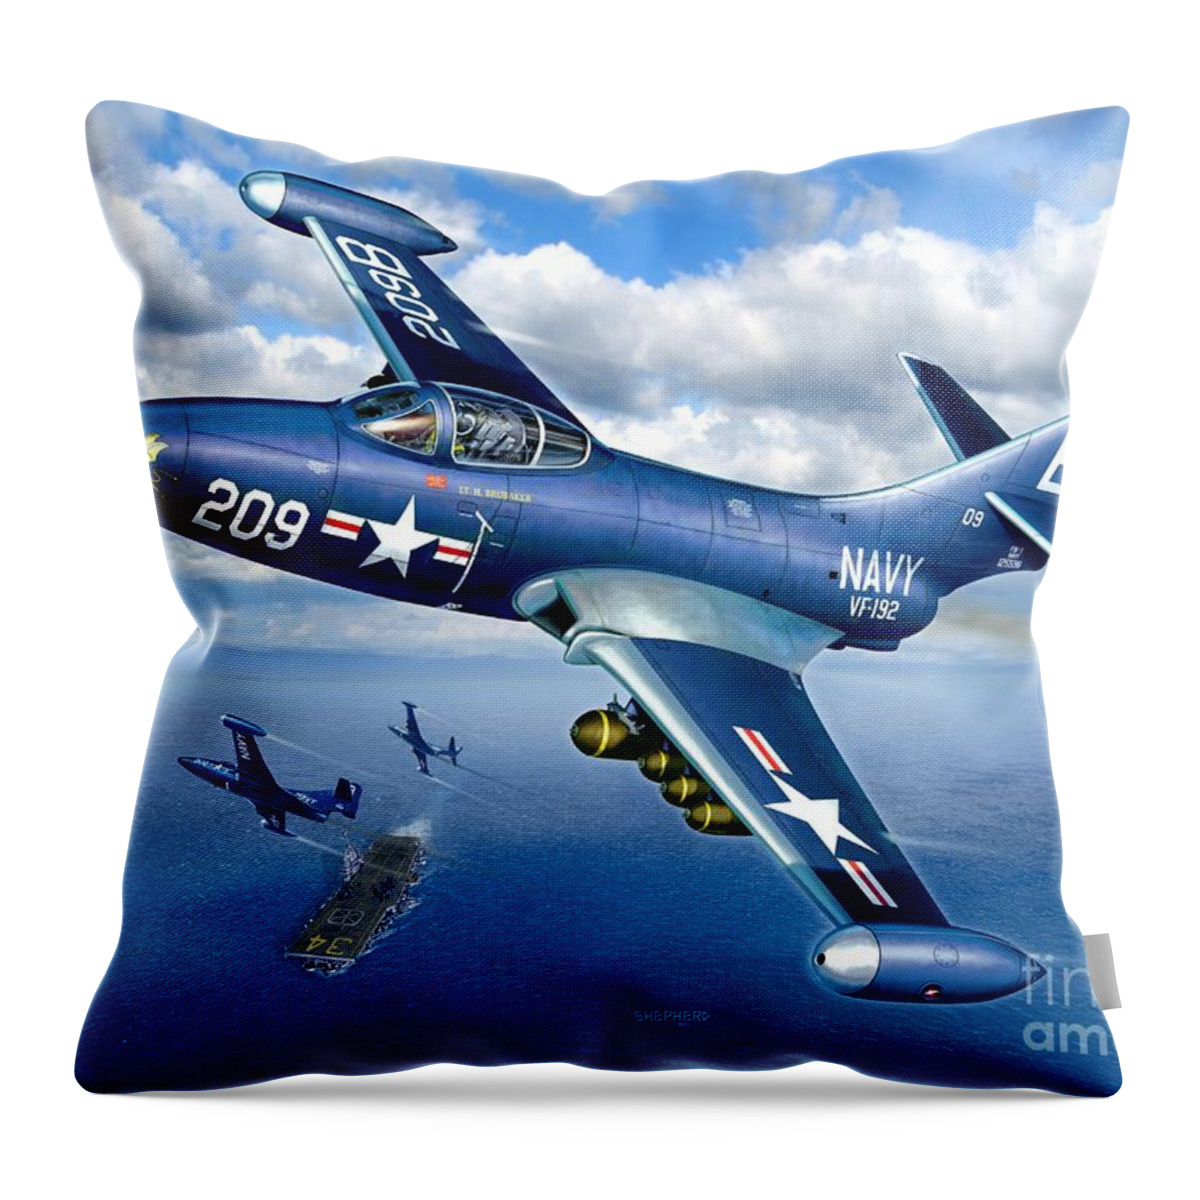 F-9f Panther Throw Pillow featuring the digital art Panther Heads Out by Stu Shepherd